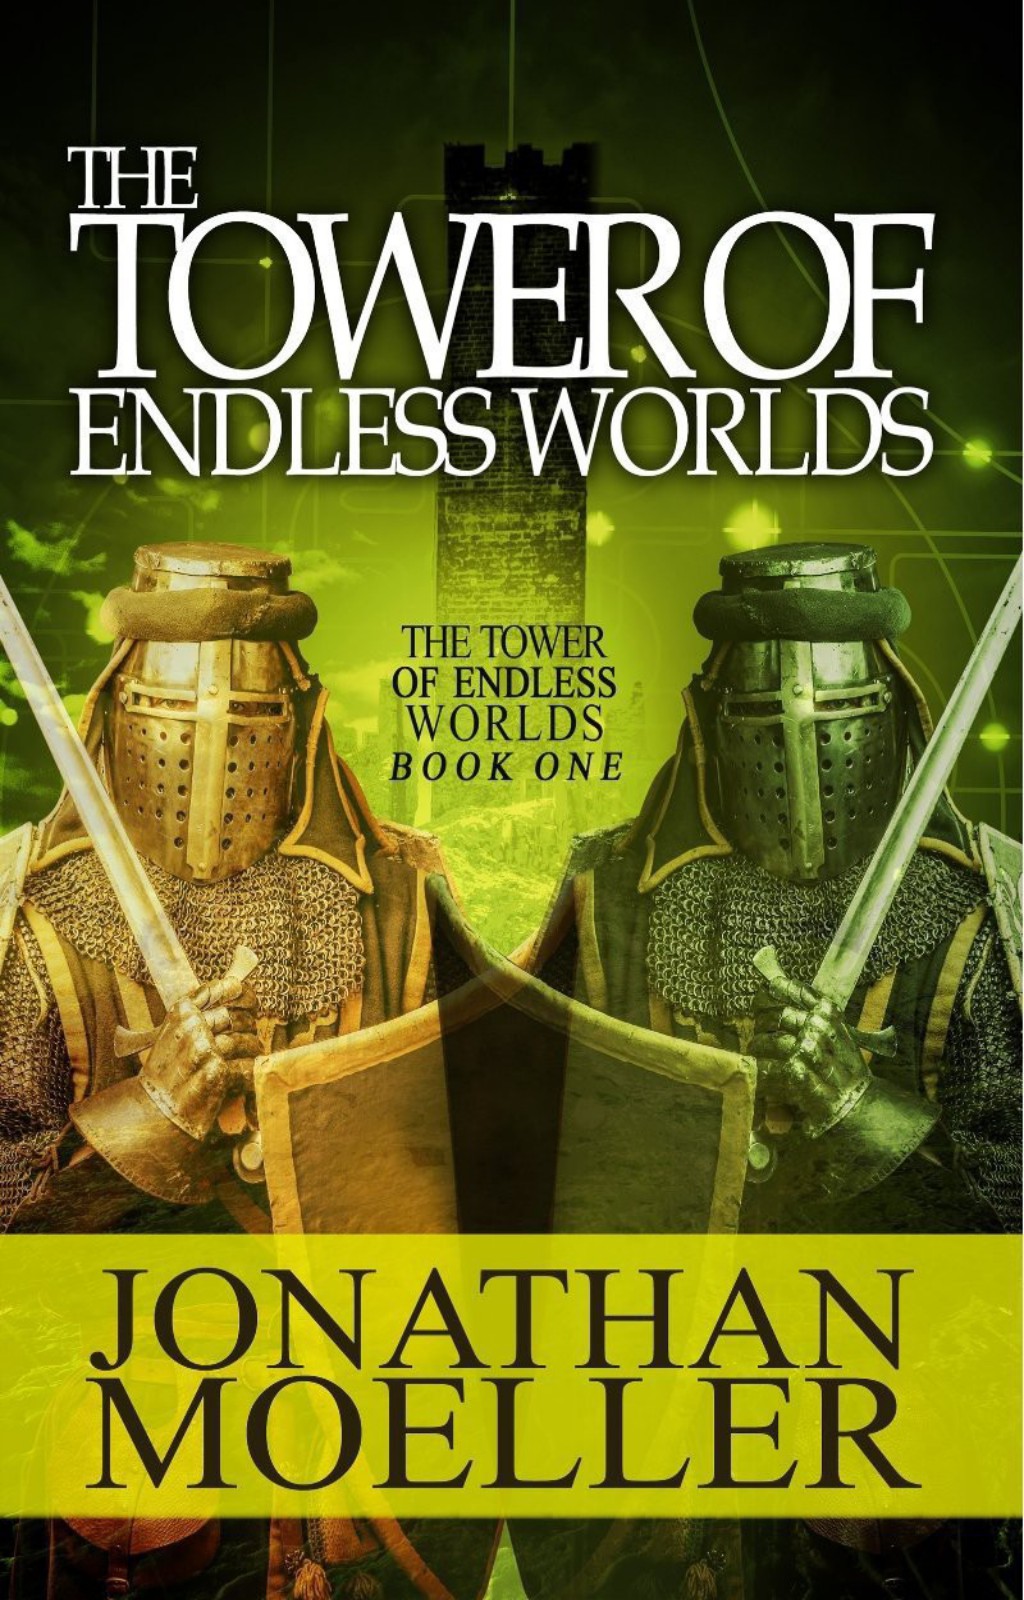 The Tower of Endless Worlds by Jonathan Moeller